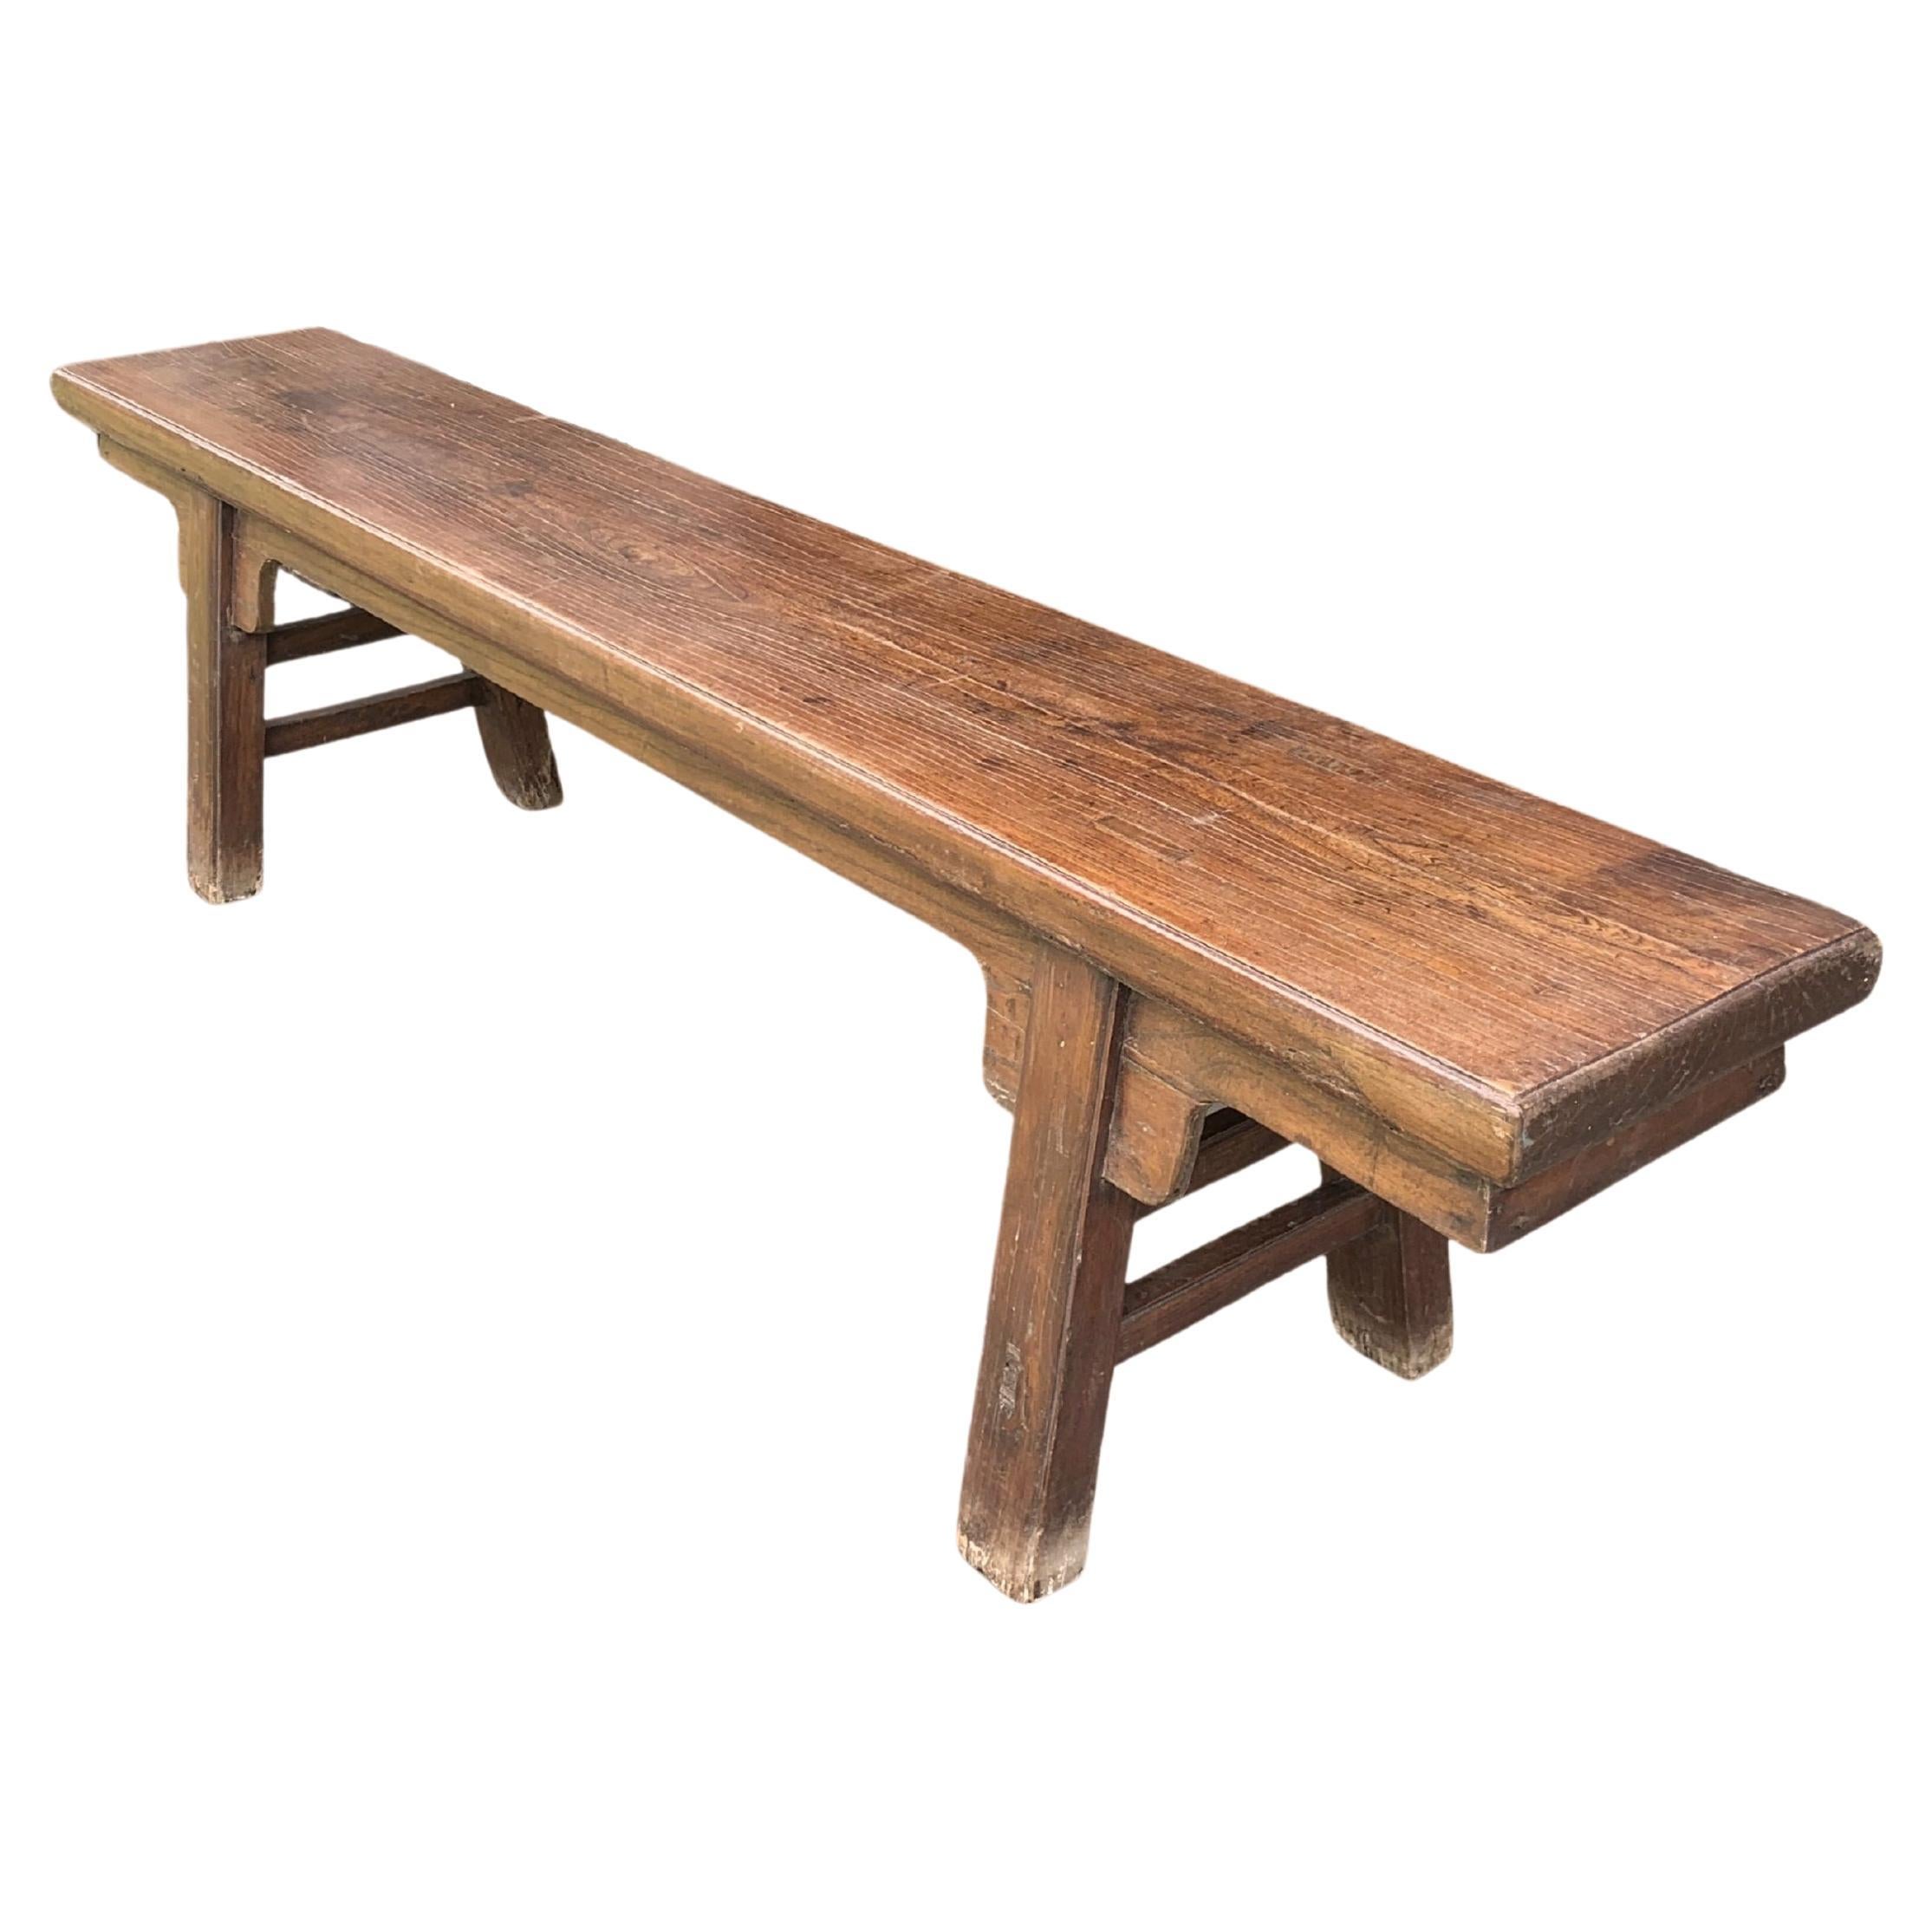 Charming Chinese Elm Ming Style Bench Long Bench Coffee Table Elm Hallway Bench Elm Chinese Hallway Bench Traditional Ming Style Bench